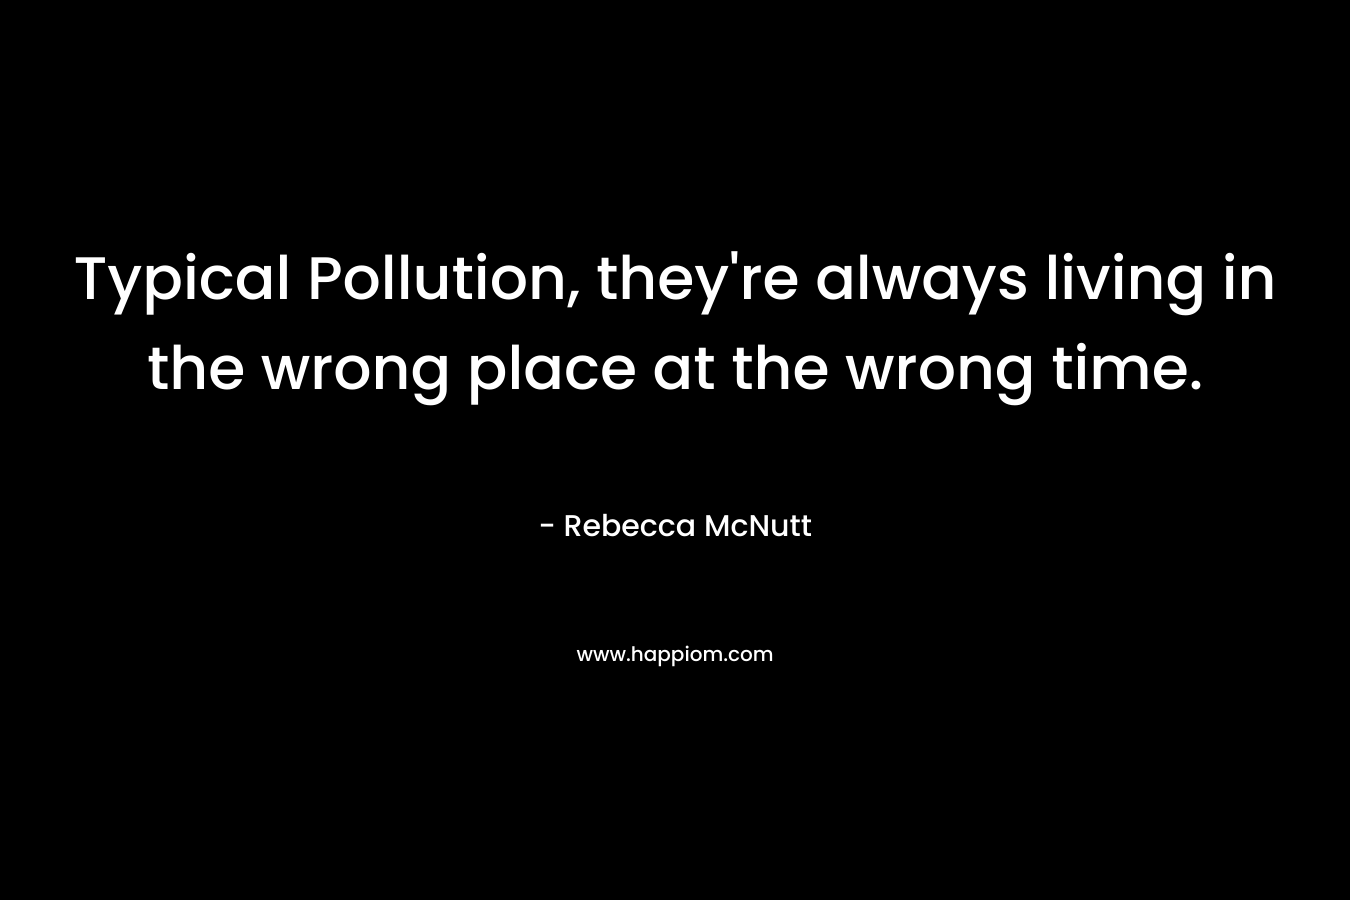 Typical Pollution, they're always living in the wrong place at the wrong time.